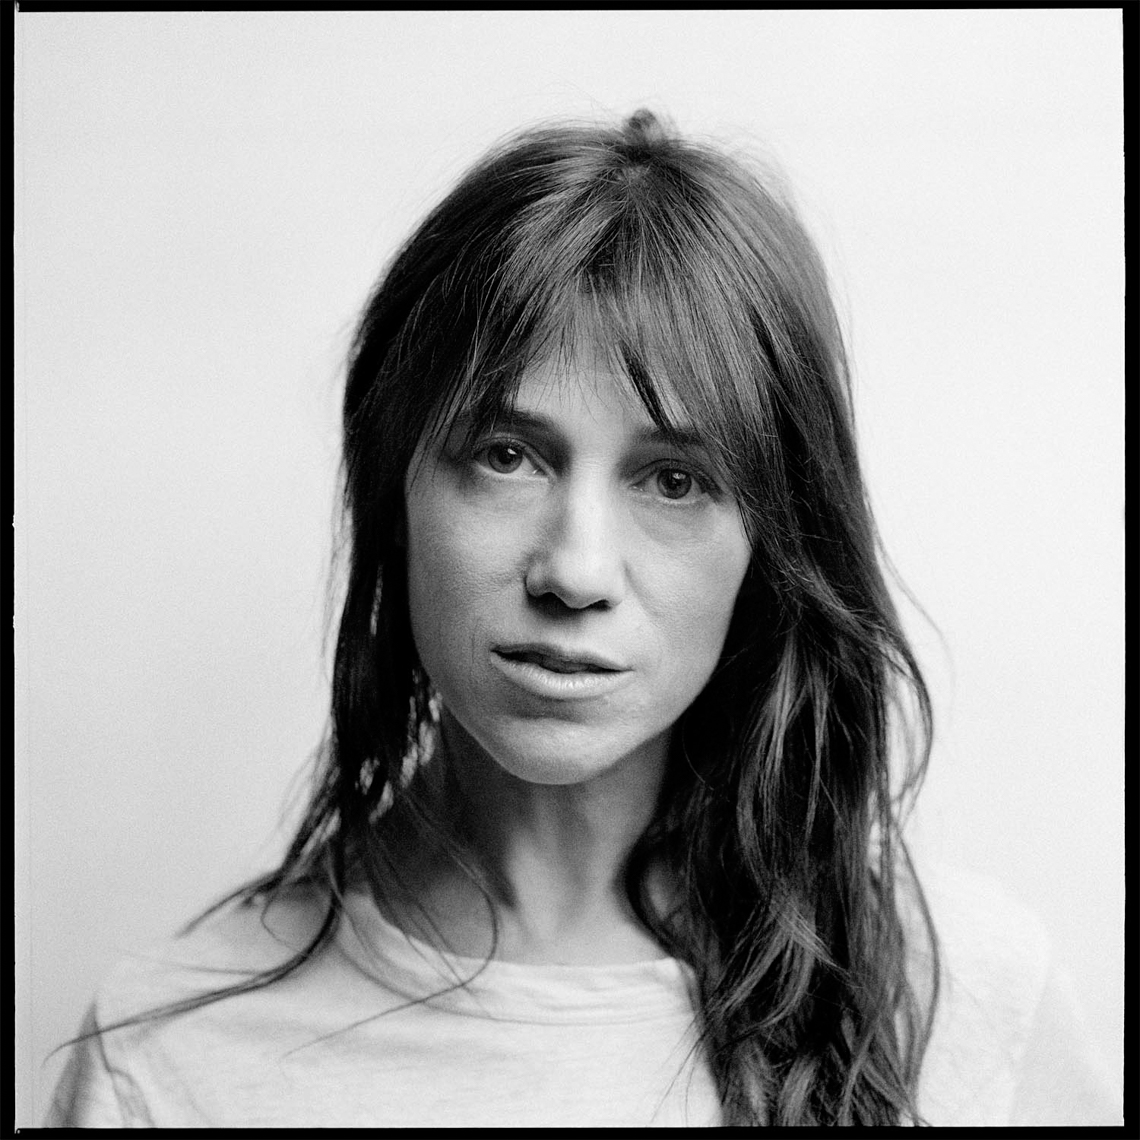 CHARLOTTE GAINSBOURGH